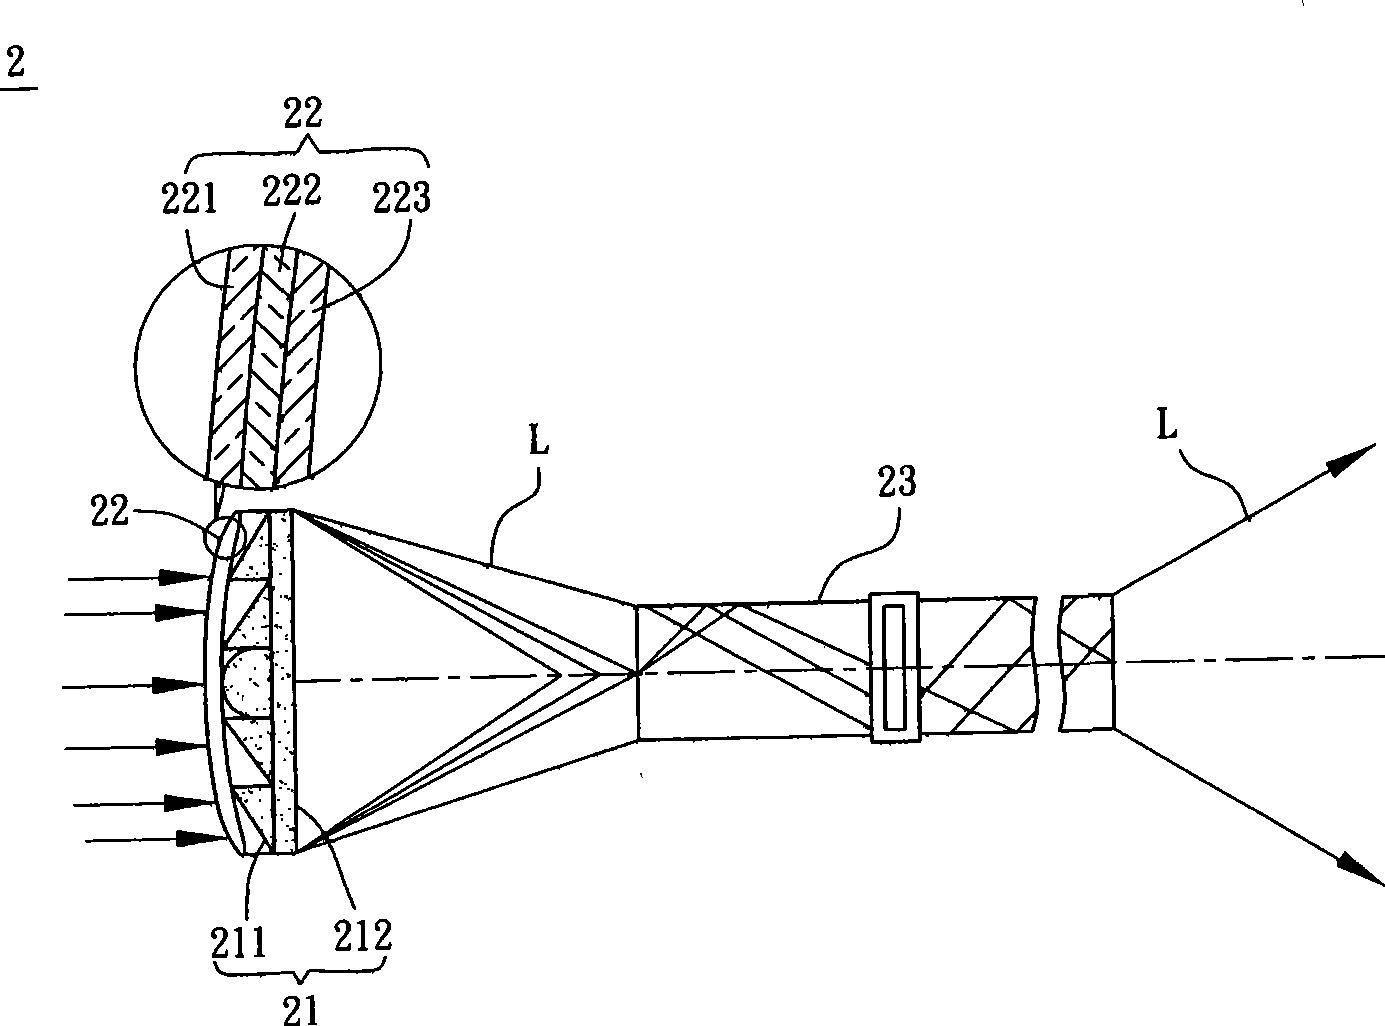 Light collecting device